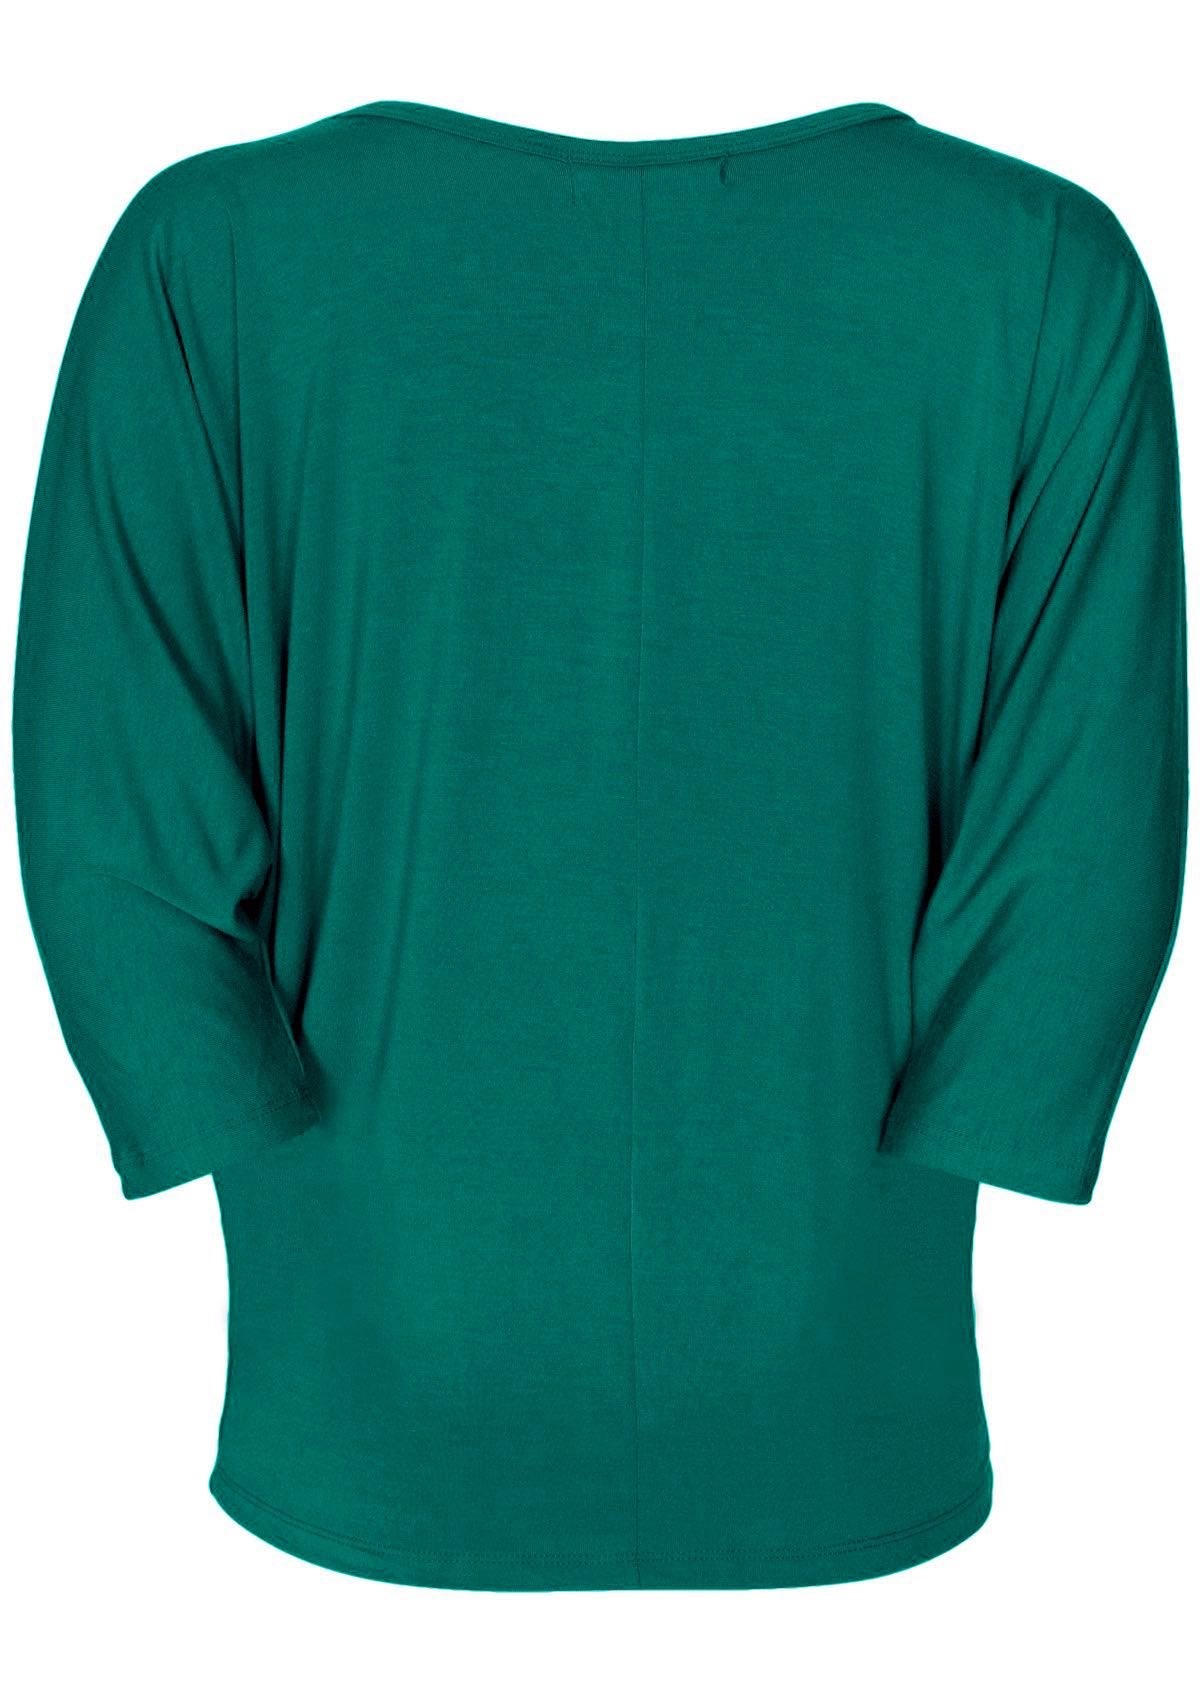 Back view of women's 3/4 sleeve rayon batwing v-neck green top.